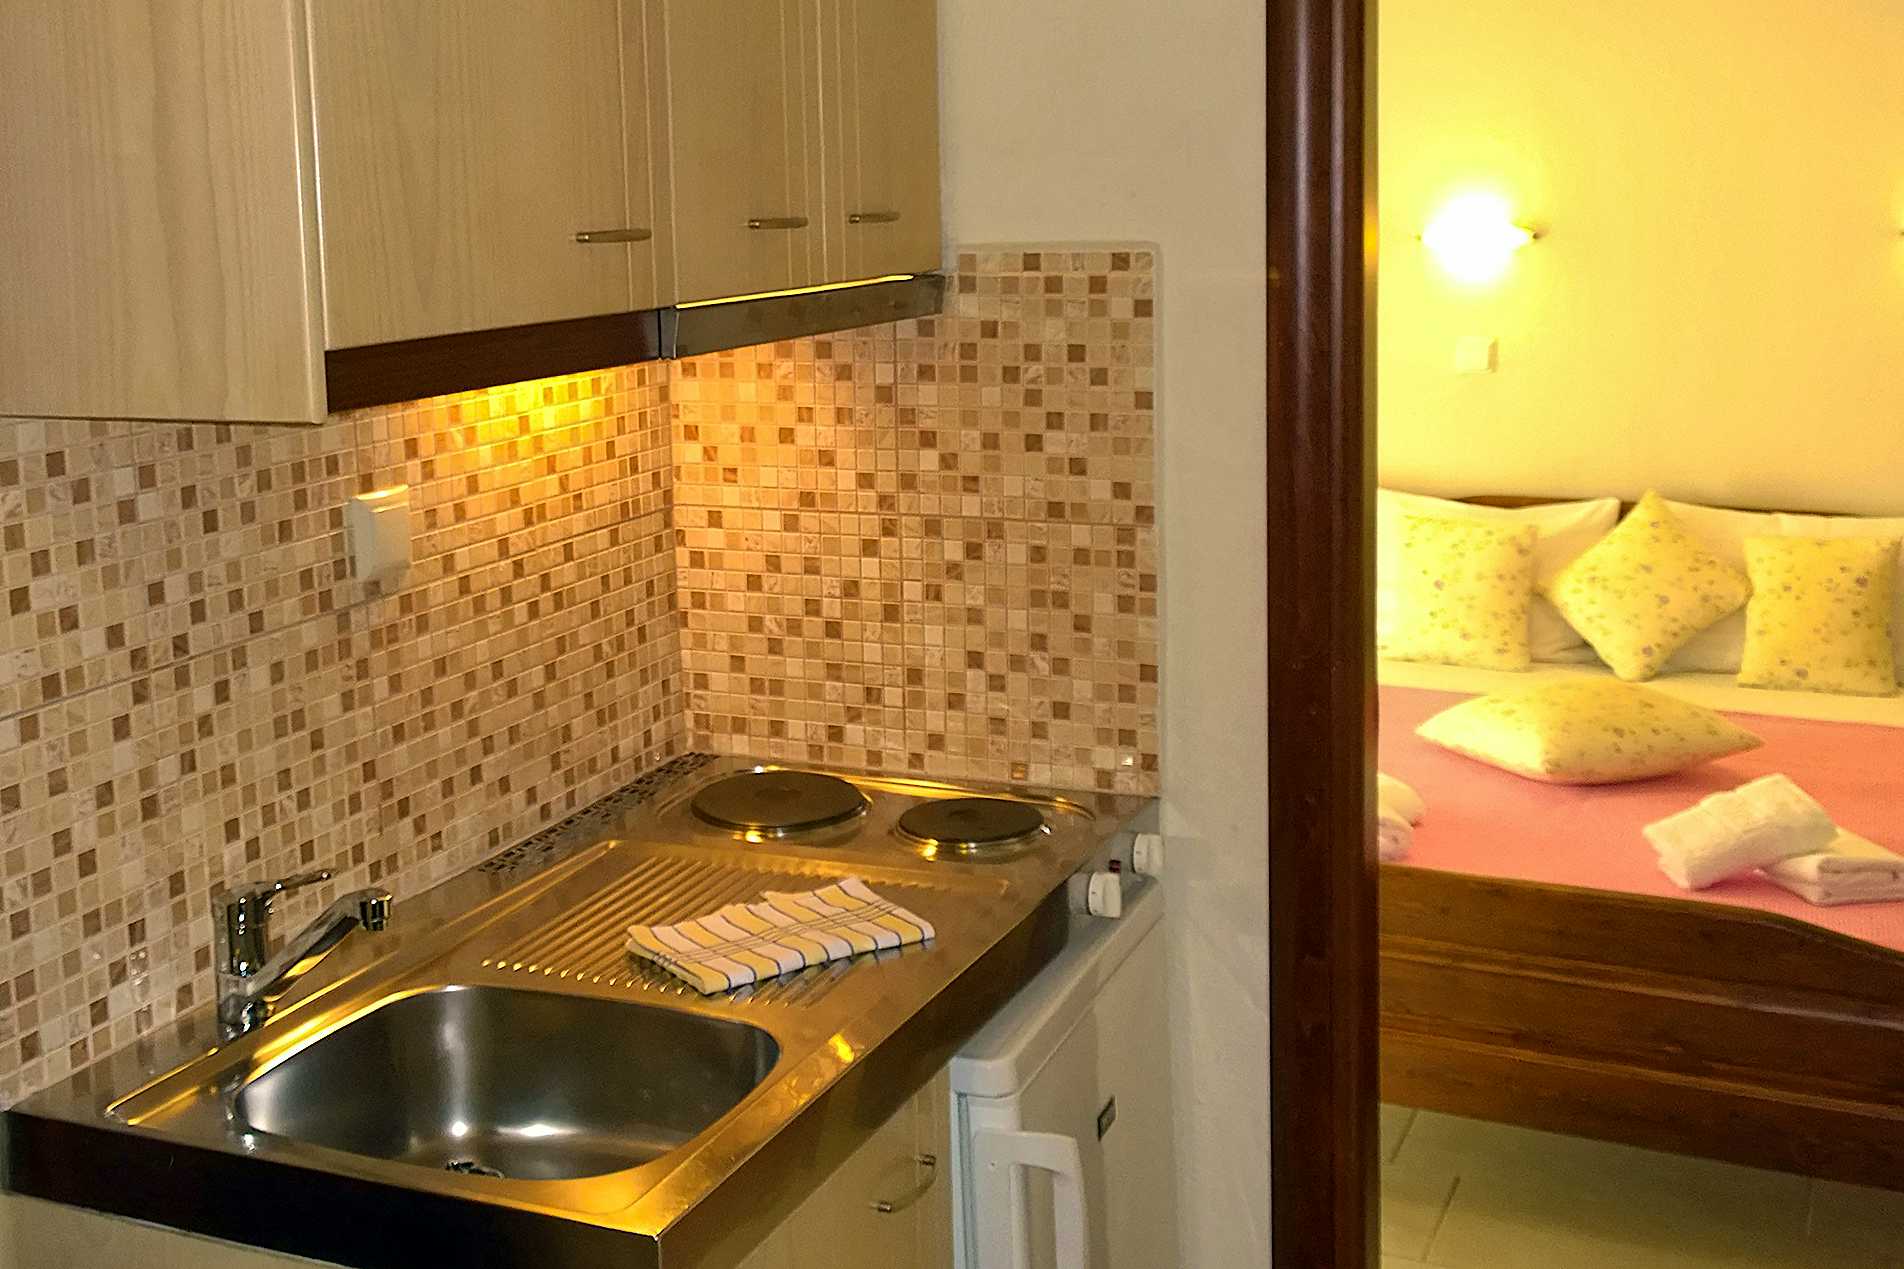 Photo Caption: In-room Kitchenette Prepare Light Meals Every stud